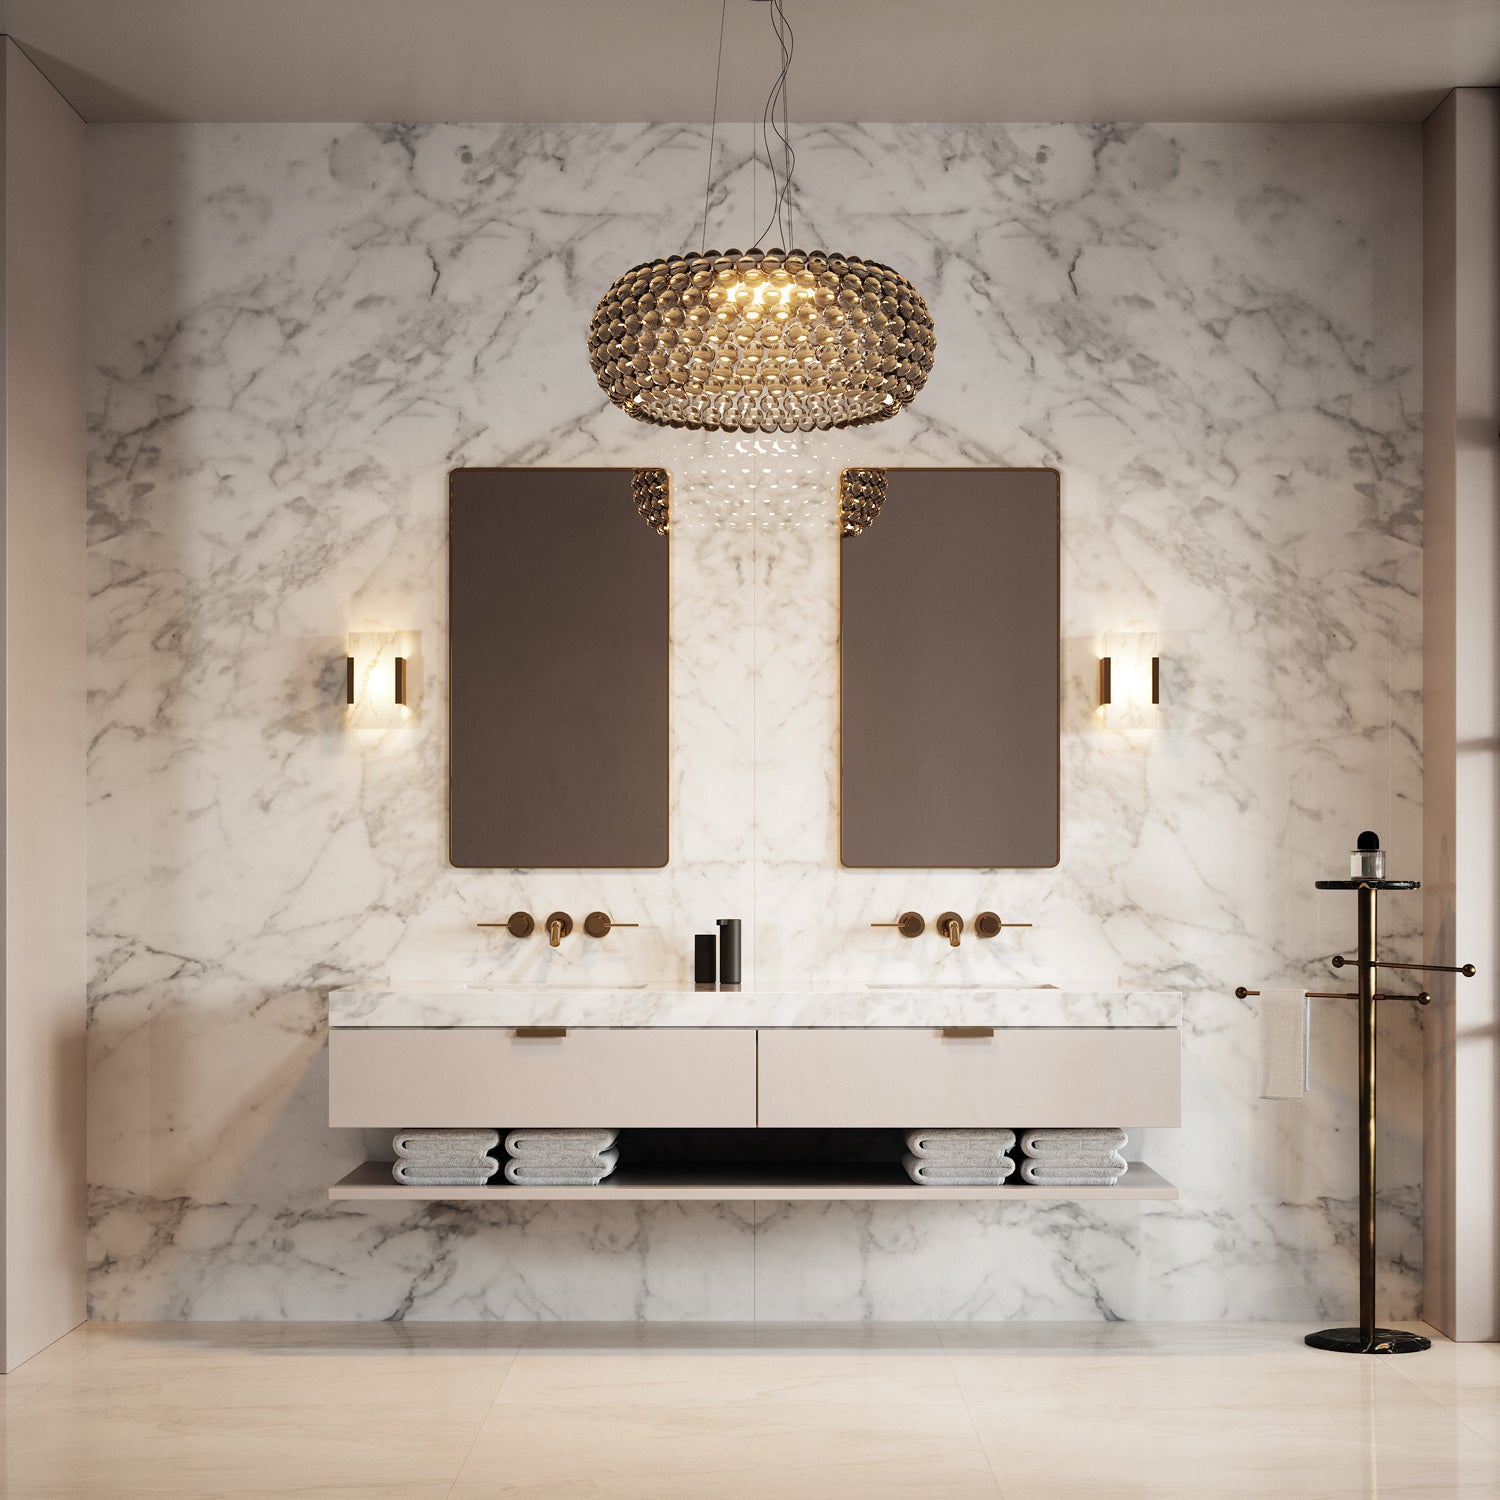 Granite-walled bathroom scene with a blown glass chandelier pendant between two mirrors